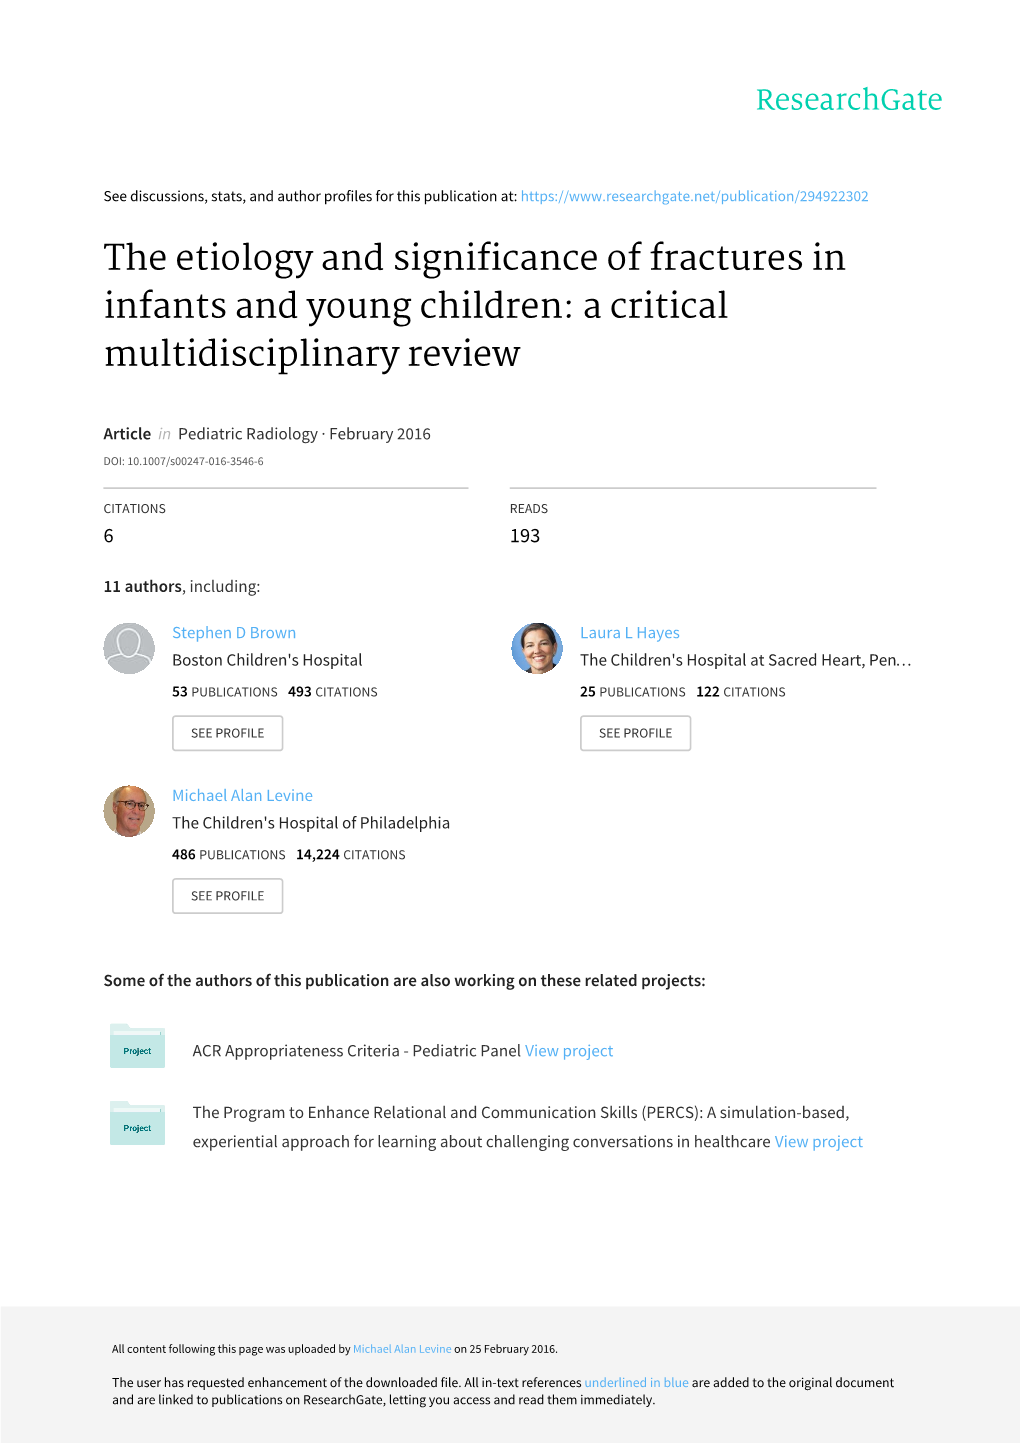 The Etiology and Significance of Fractures in Infants and Young Children: a Critical Multidisciplinary Review